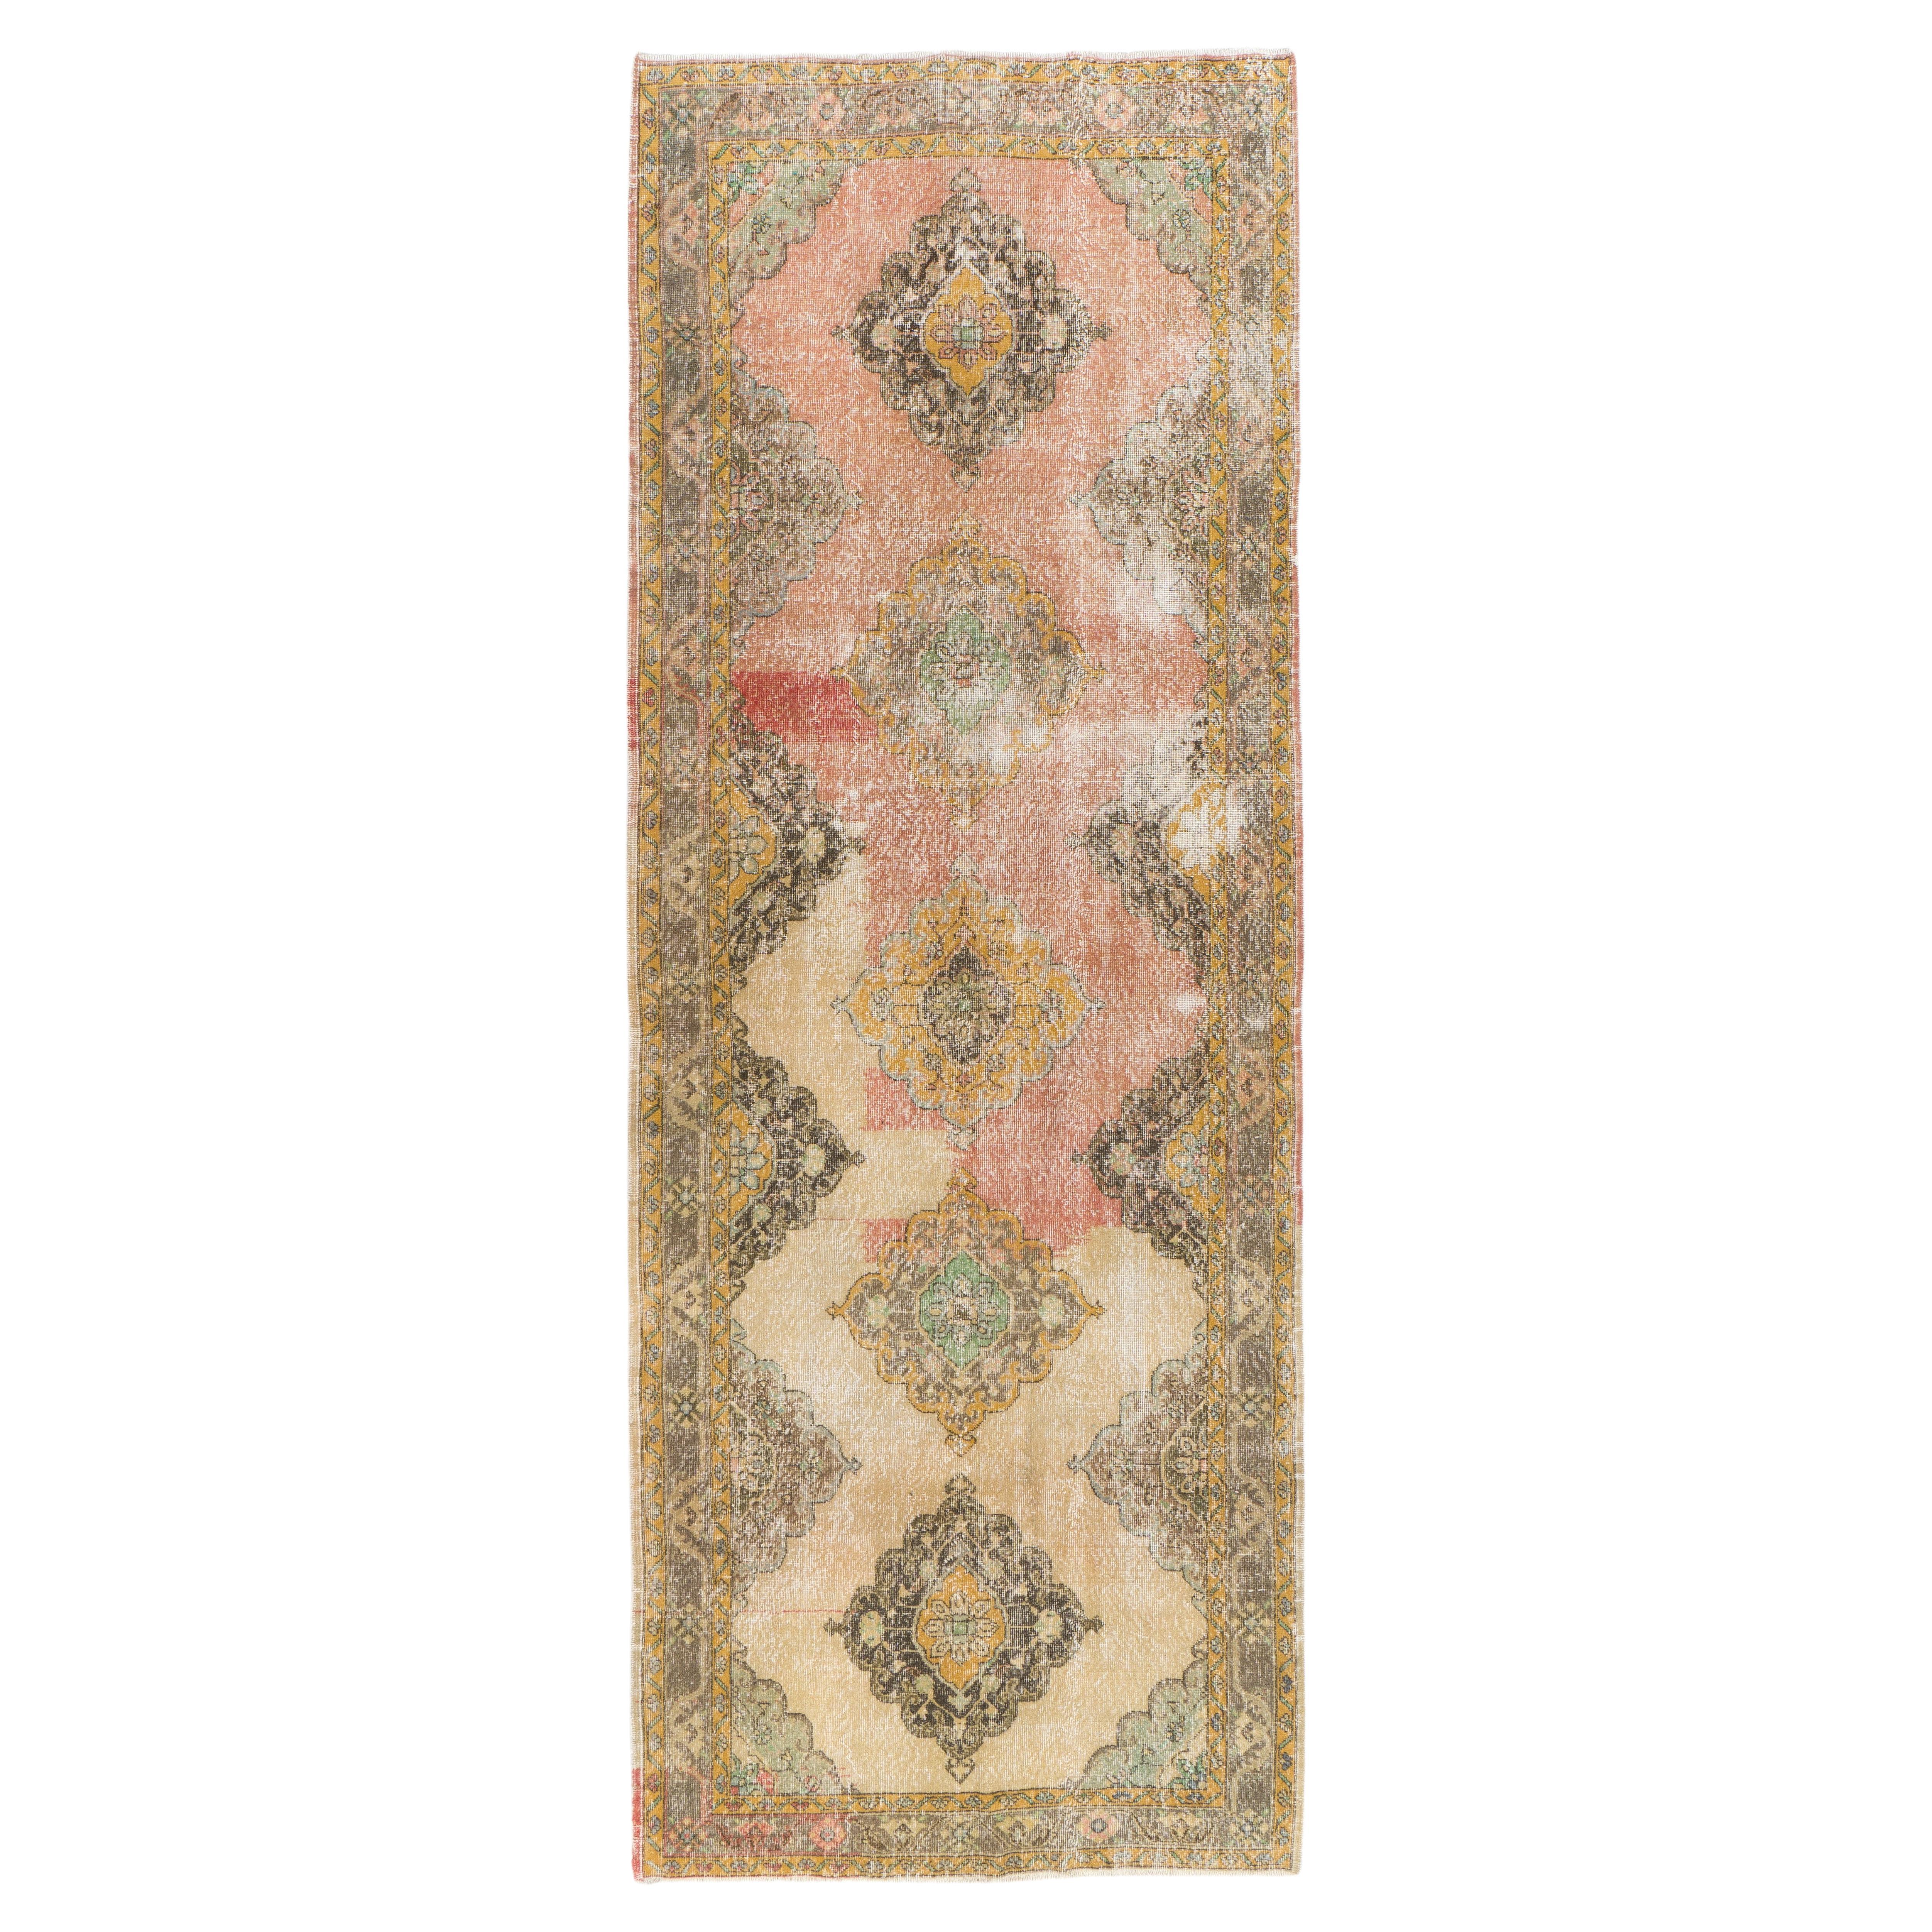 4.6x13 Ft Mid-Century Shabby Chic Anatolian Oushak Runner Rug in Soft Colors For Sale